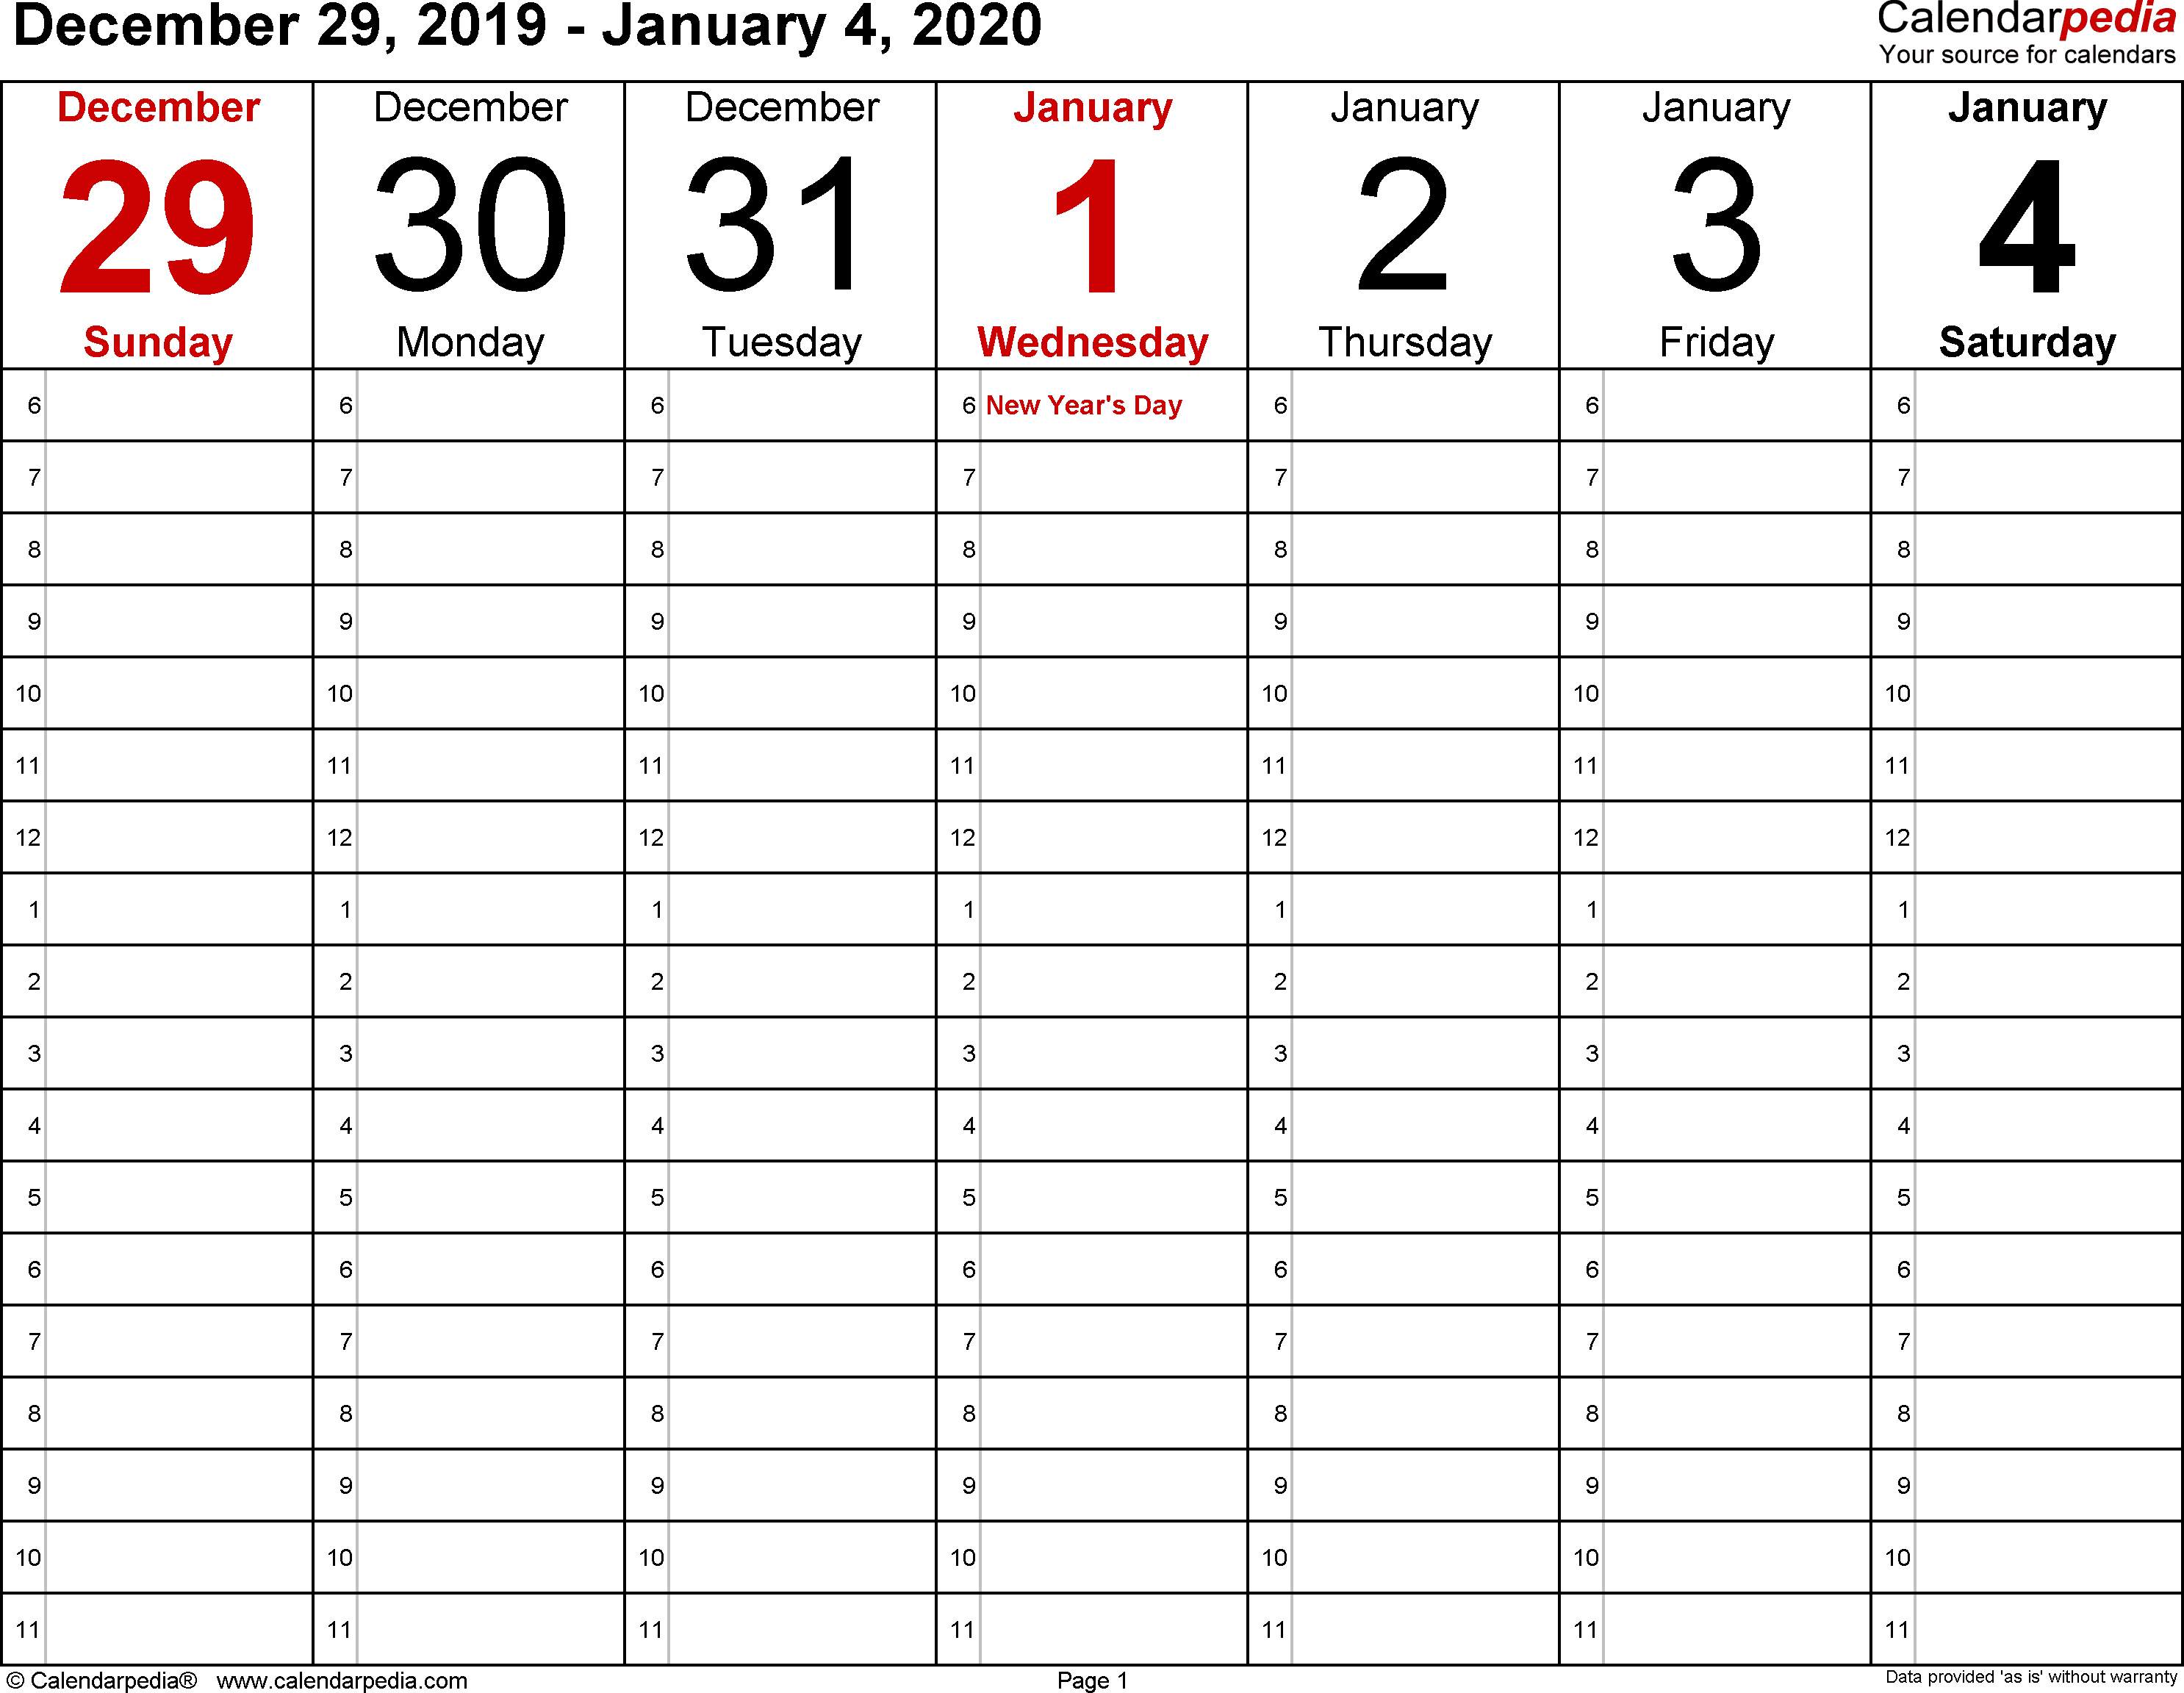 Weekly Calendar 2020 For Excel - 12 Free Printable Templates